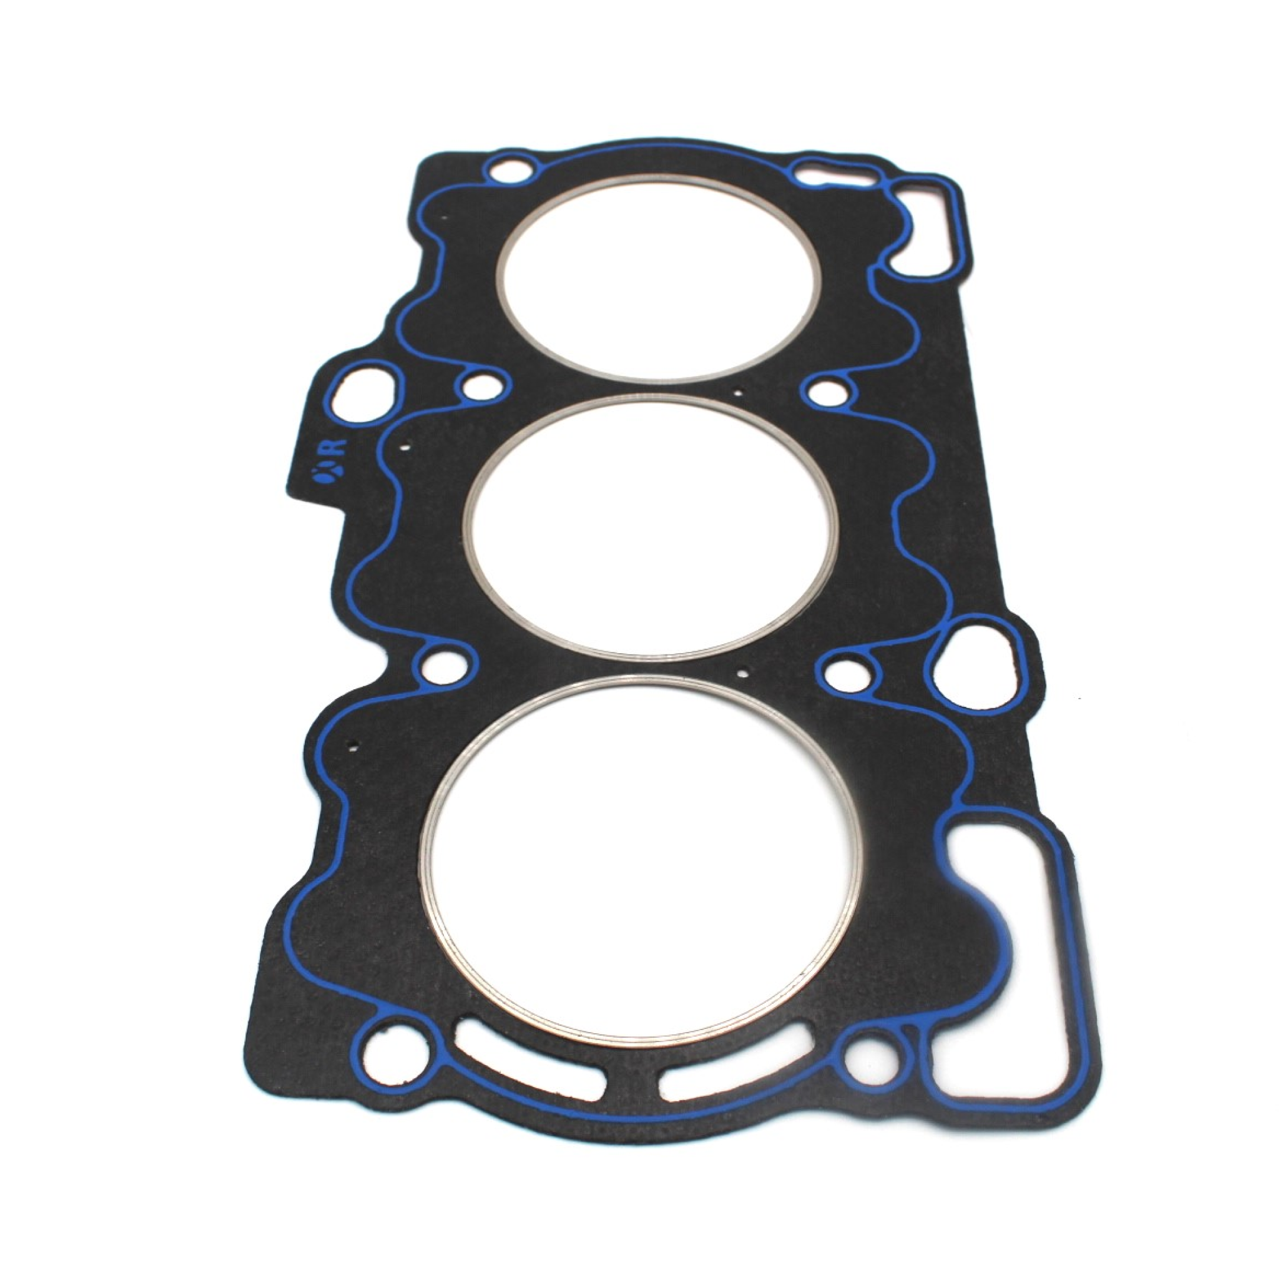 Athena Cut Ring Gasket Pair For EZ30 90mm Bore x 1mm Thickness